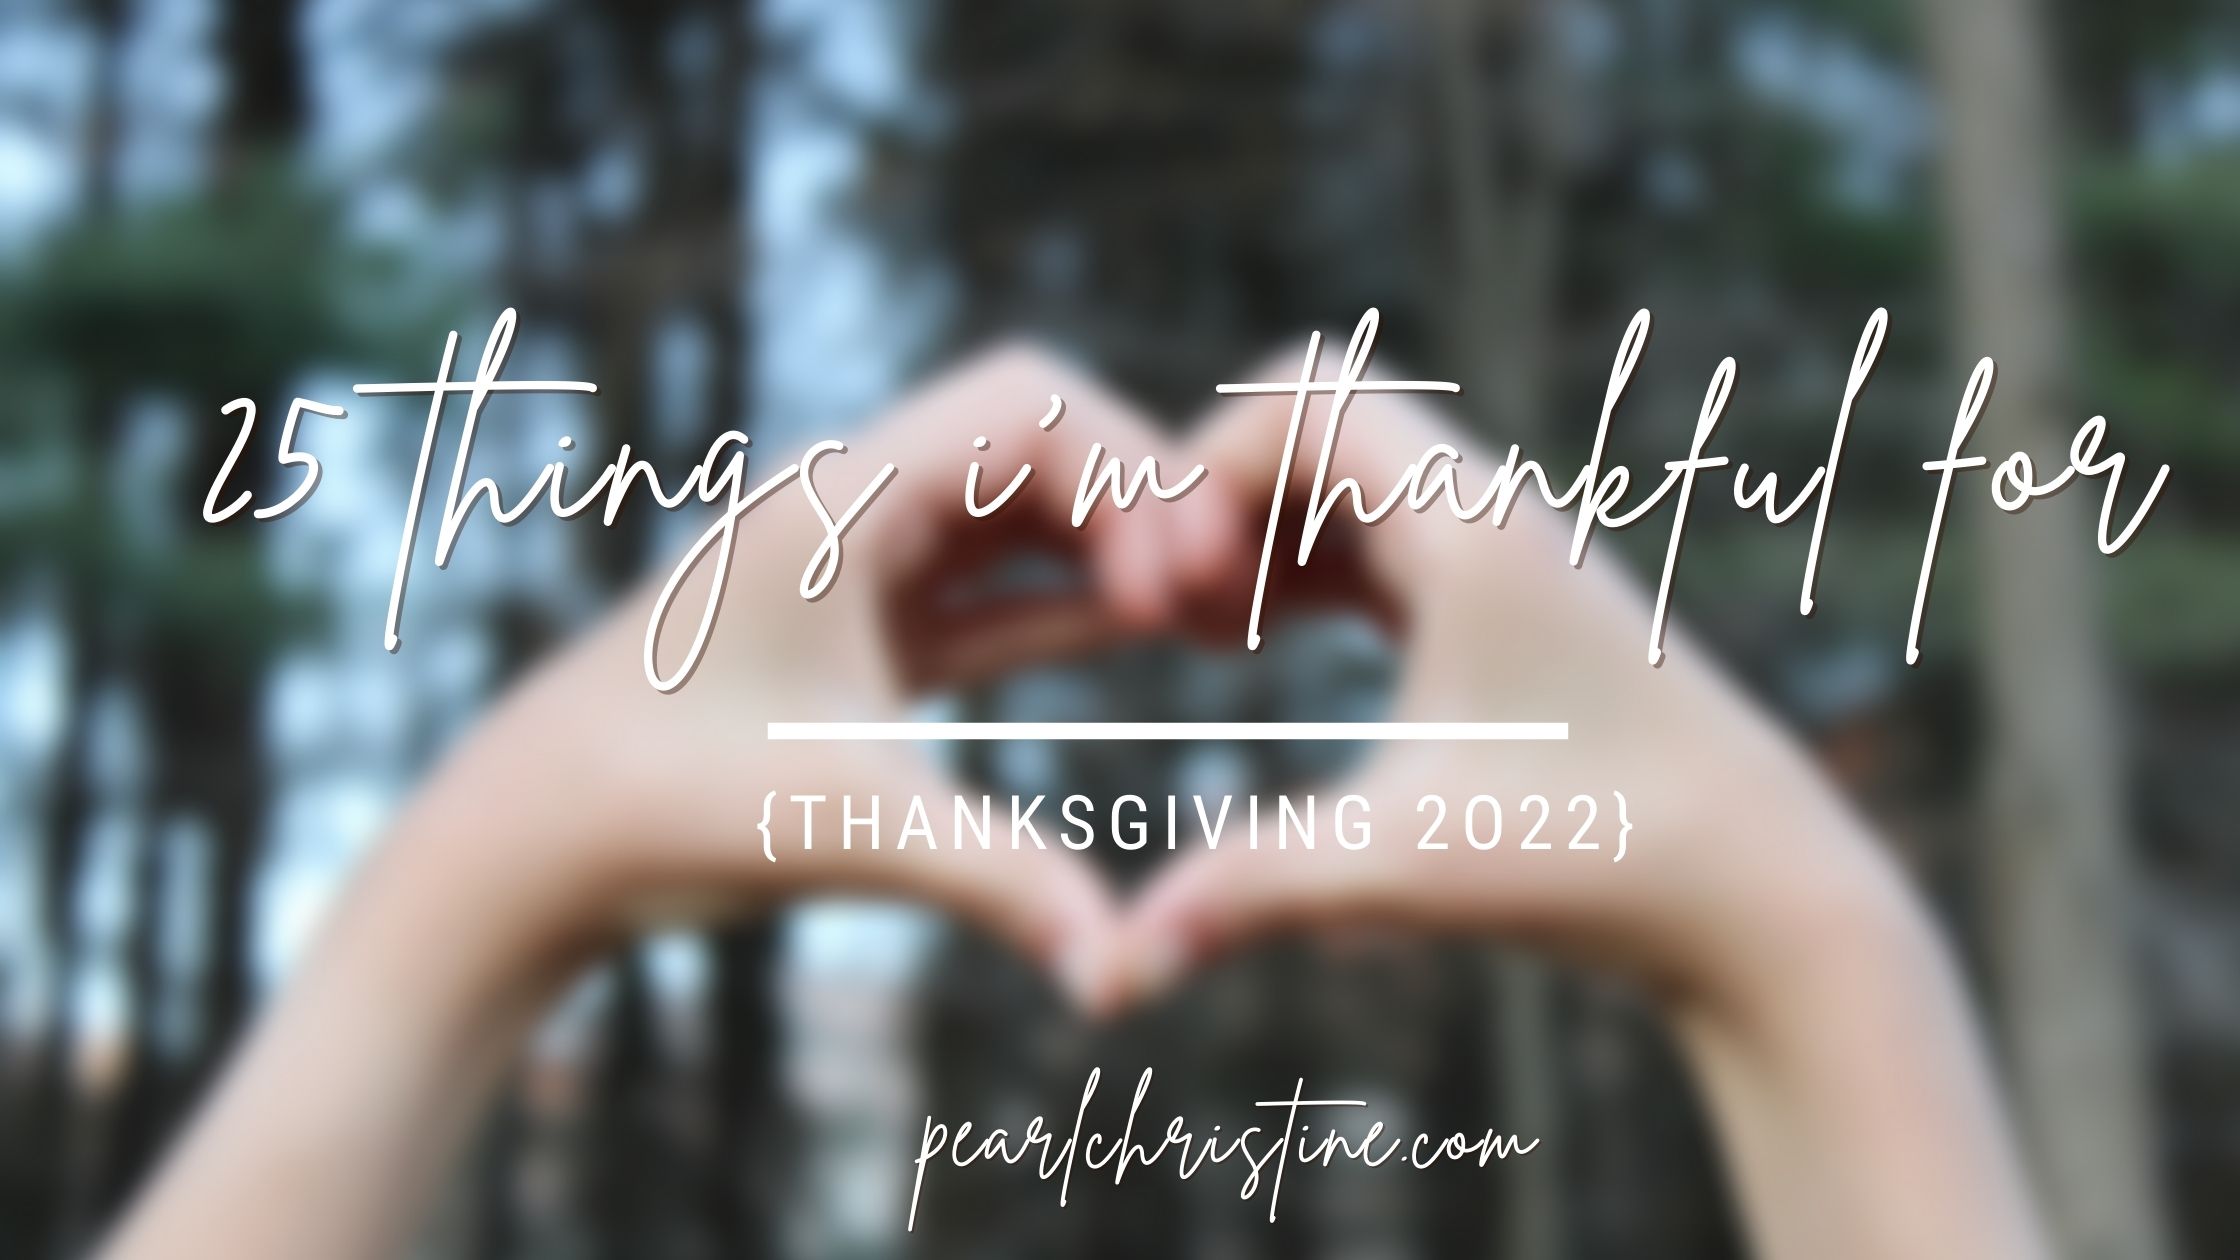 25 things i’m thankful for today